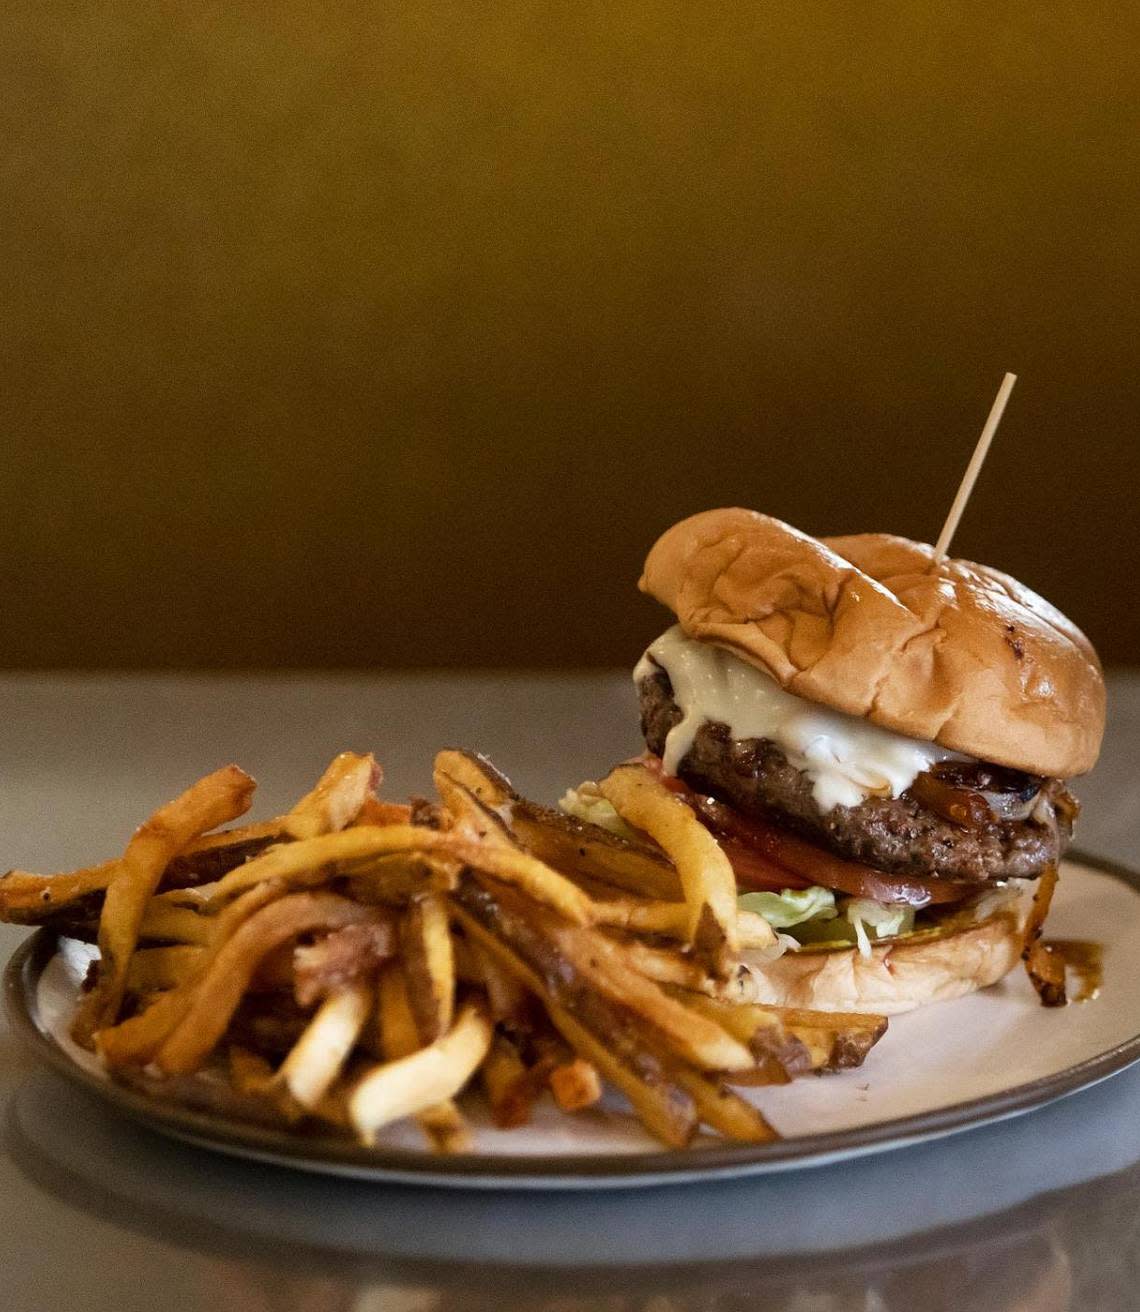 The Diablo burger at Fred’s Texas Cafe on Friday, June 17, 2022. The Diablo burger, one of Fred’s iconic menu items, features chipotle brown butter, grilled onions, Swiss cheese, pickles, lettuce, tomato and mustard. Amanda McCoy/amccoy@star-telegram.com